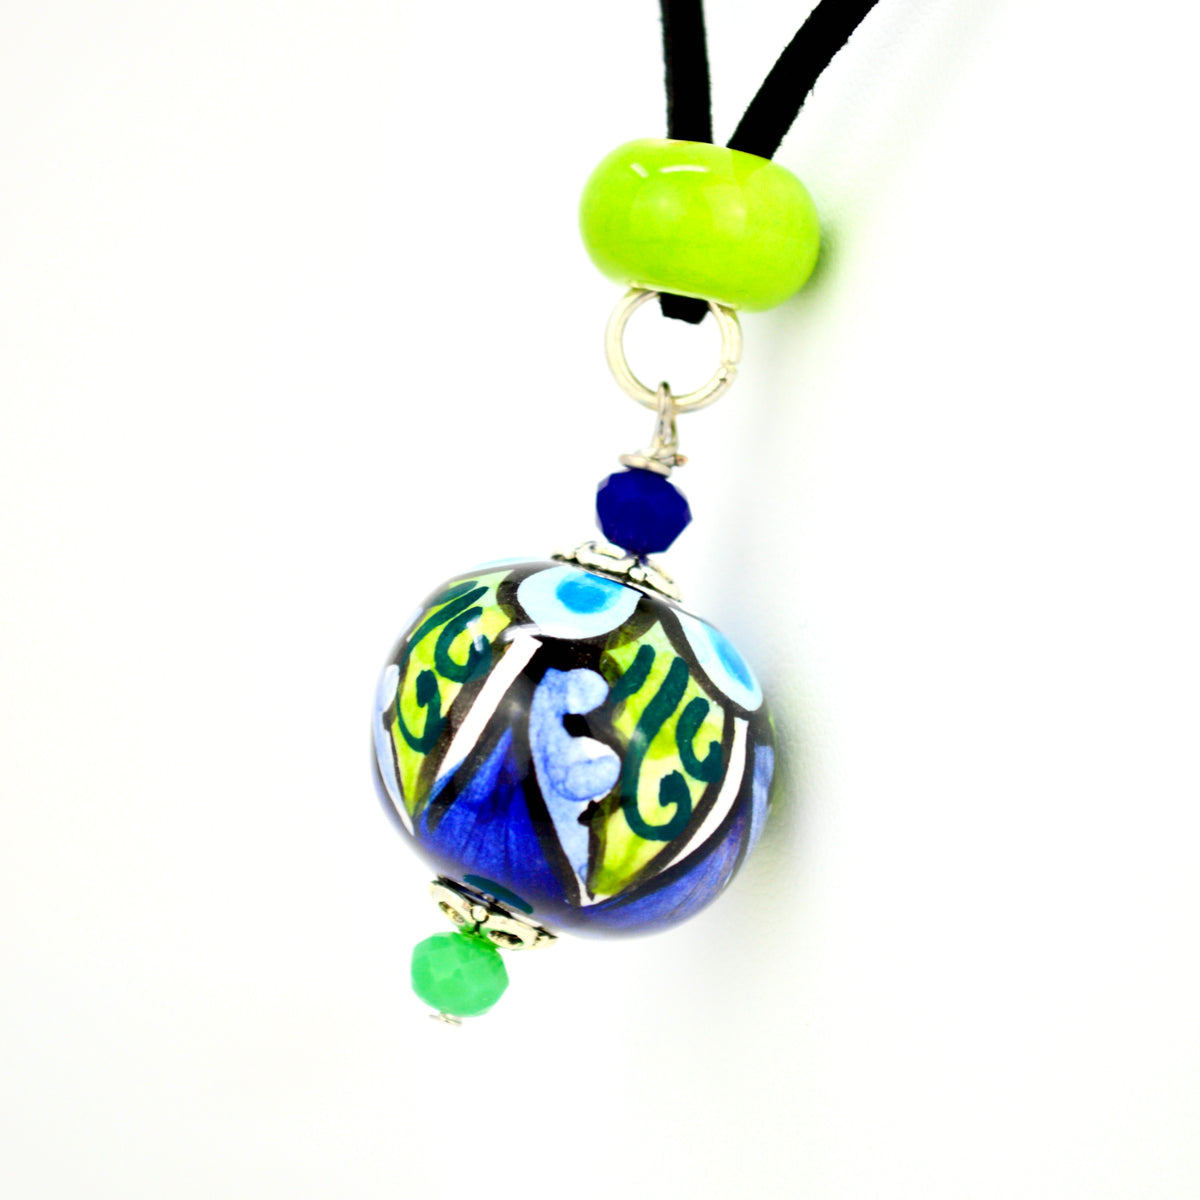 Italian Ceramic Diana Necklace, Blue and Green, Hand-Crafted In Italy - My Italian Decor